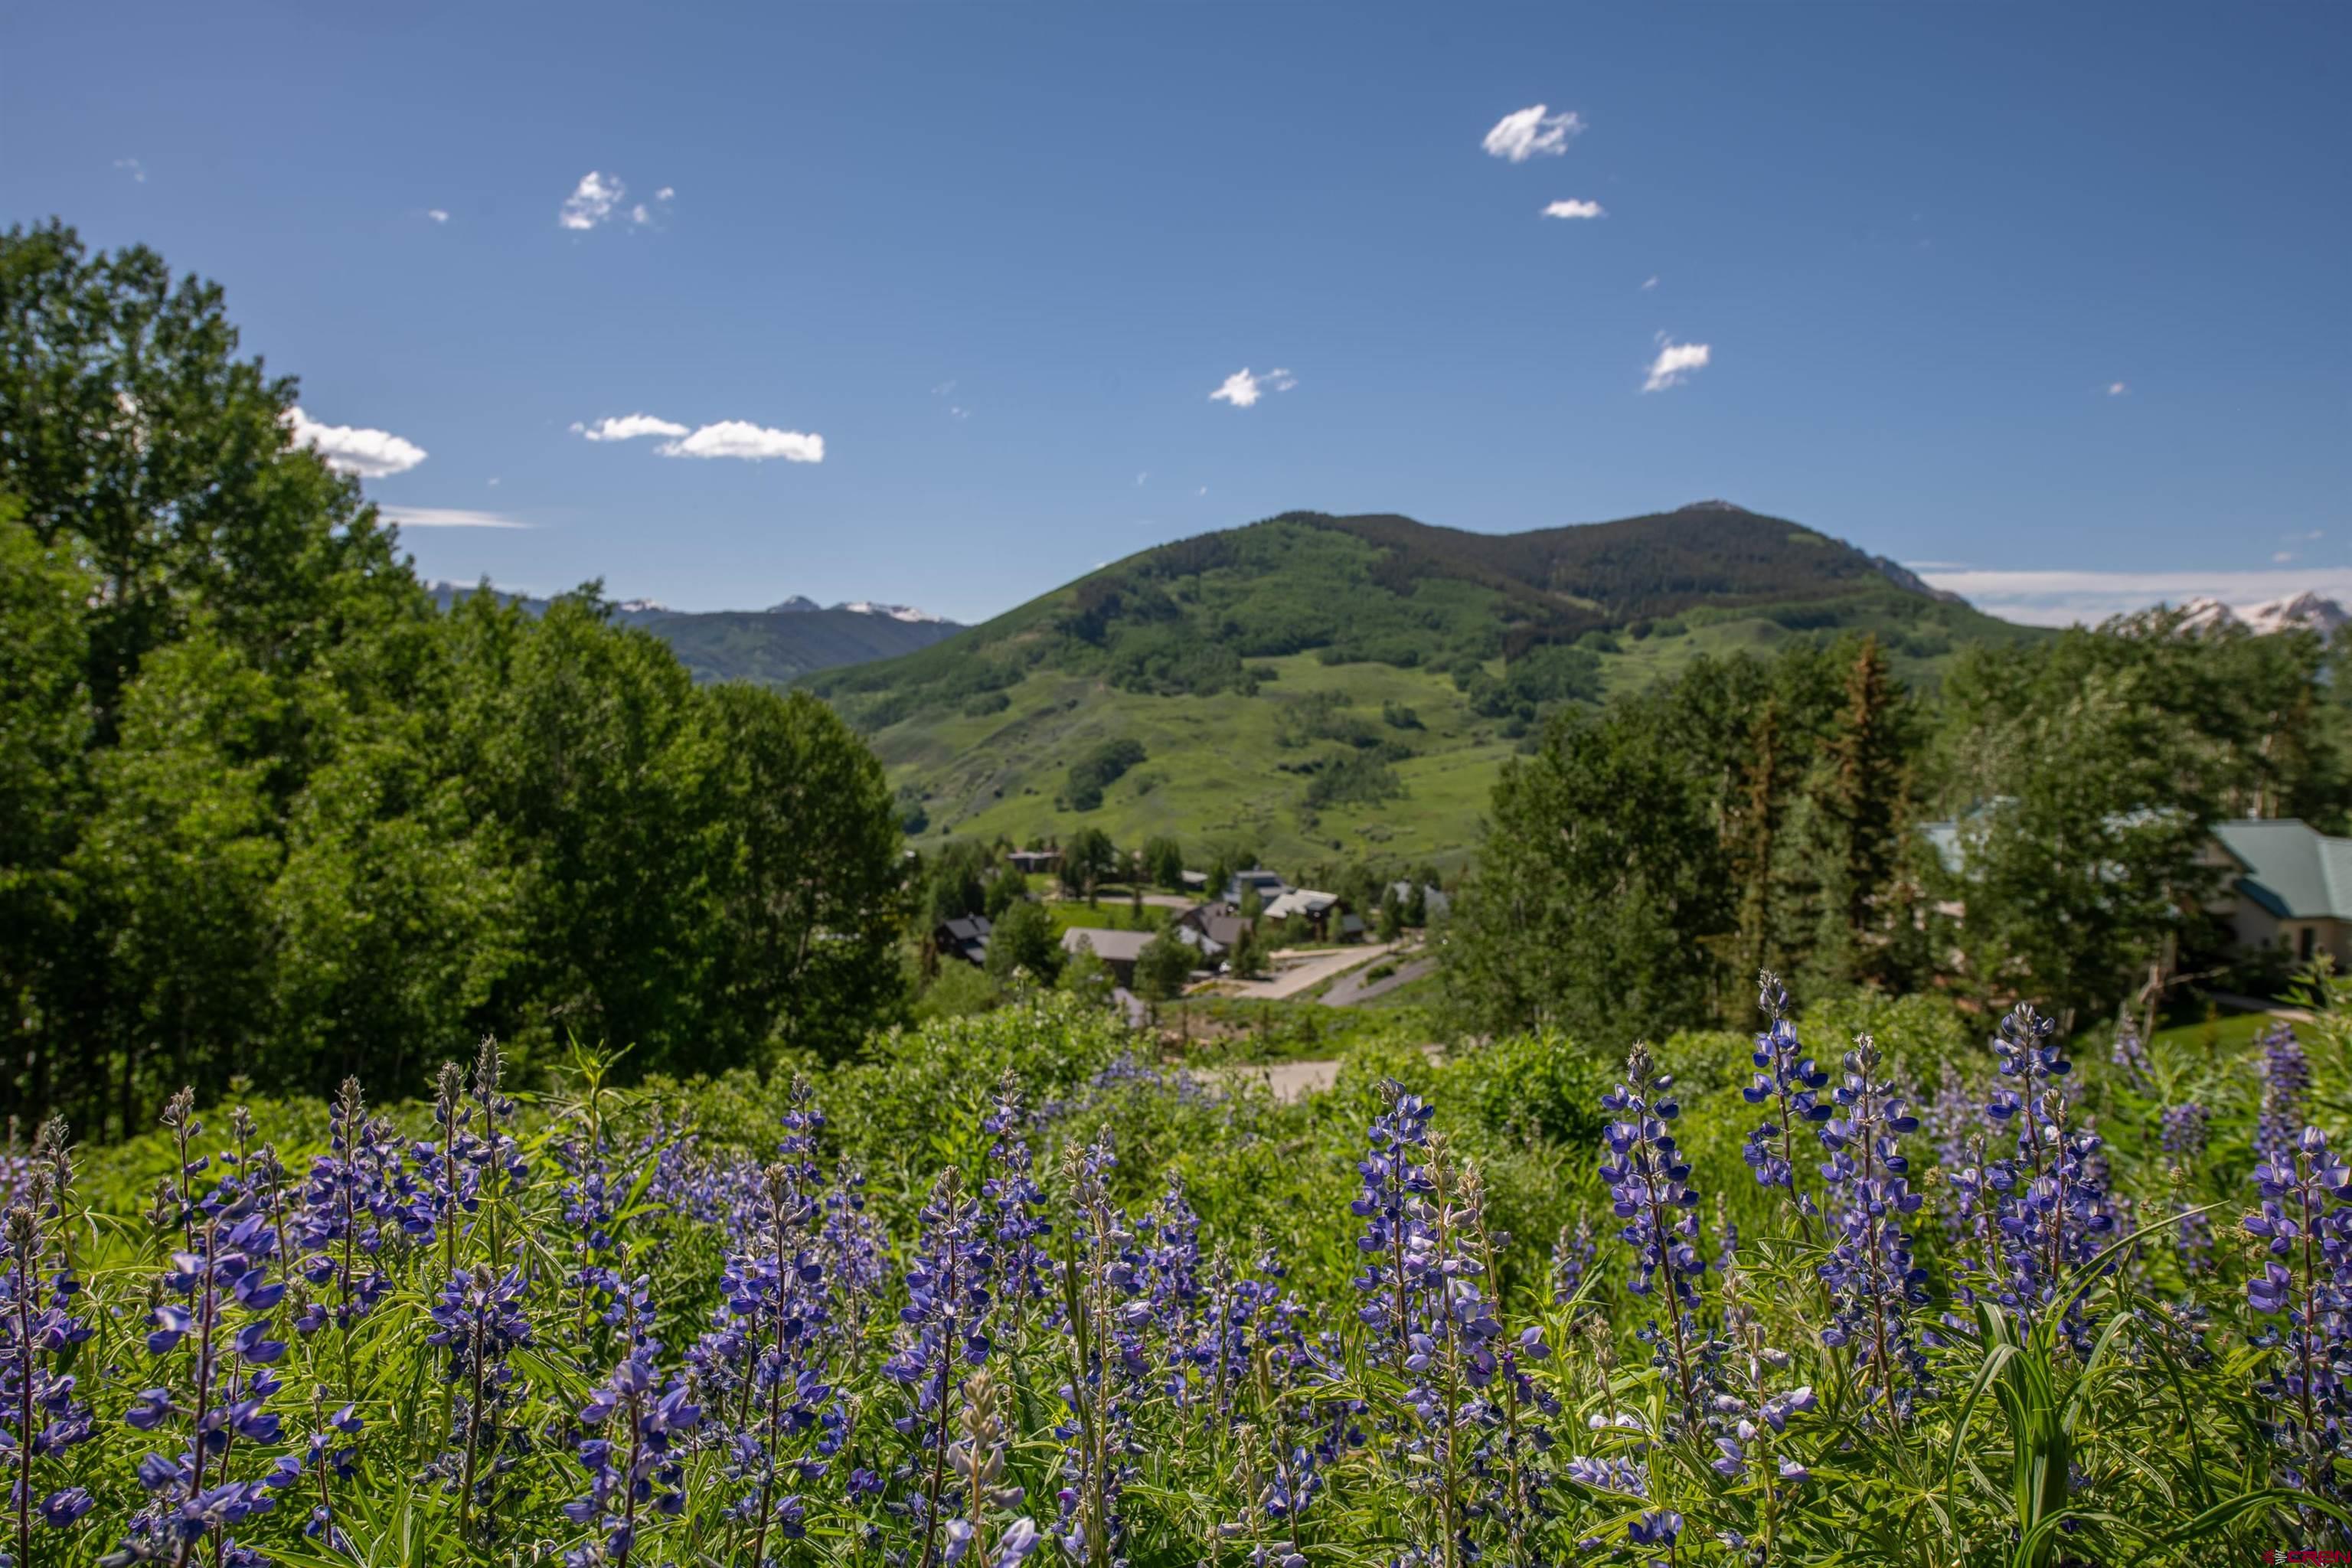 92 Anthracite Road, Mt. Crested Butte, CO 